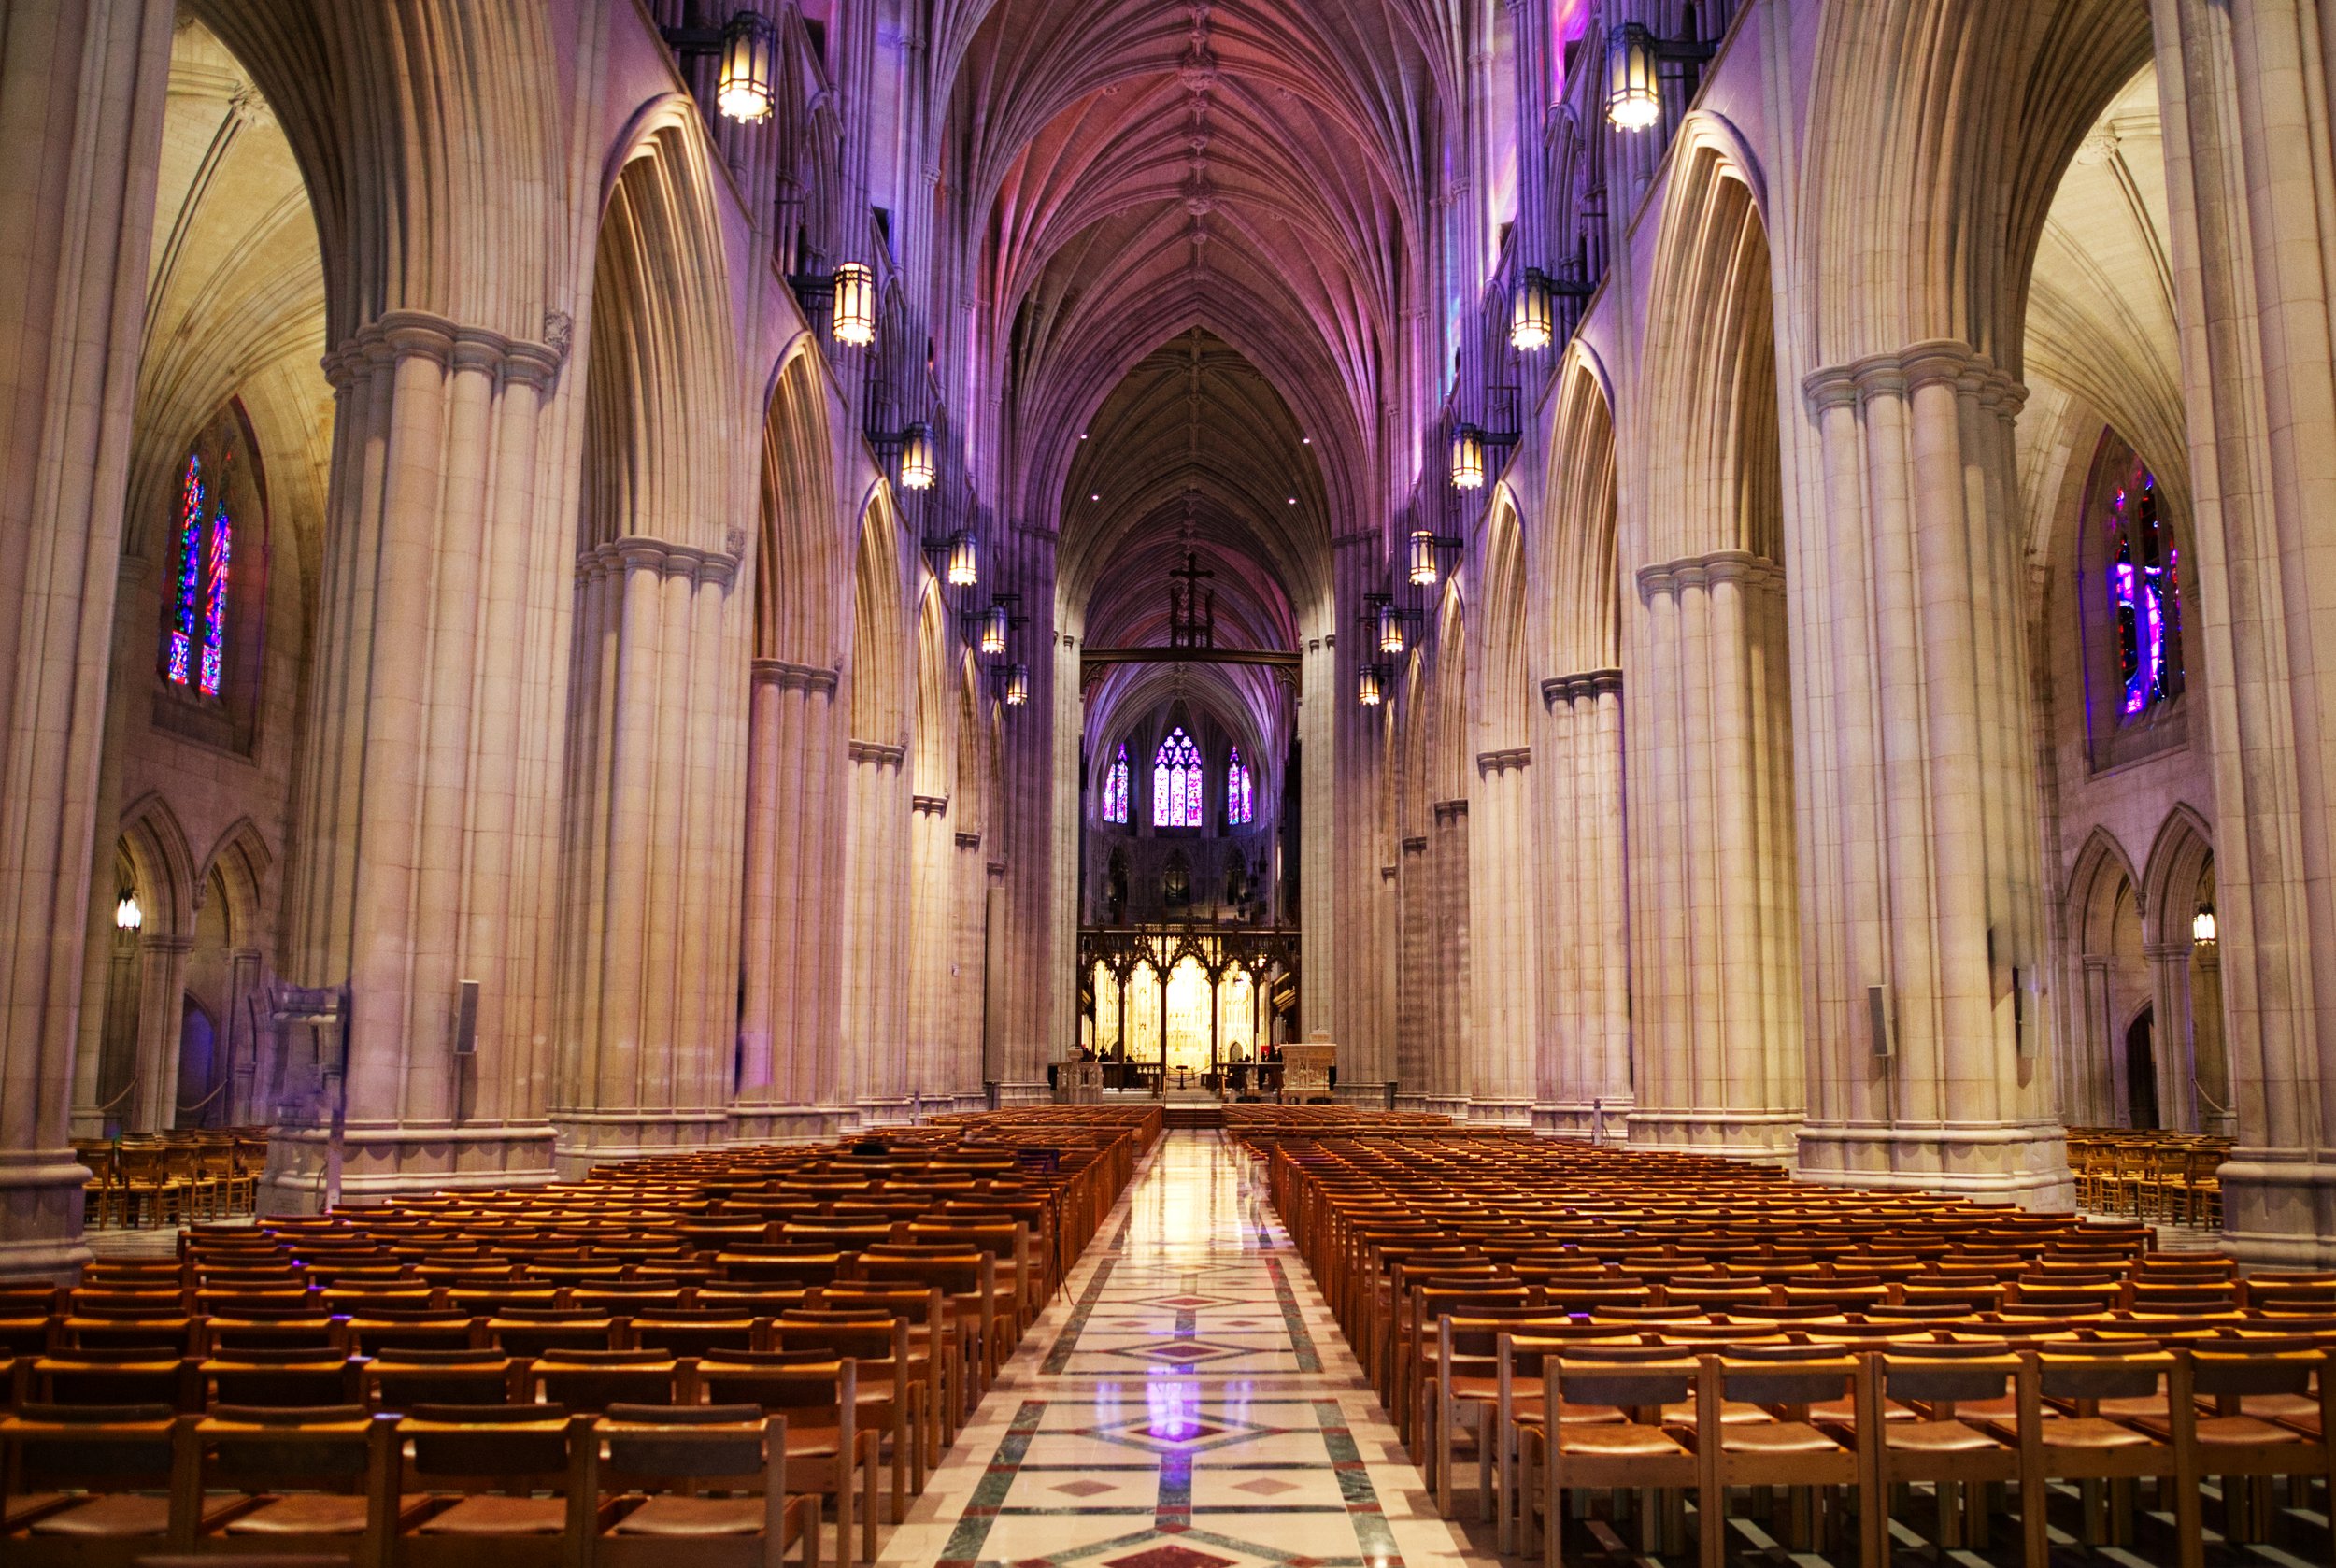 The Rose Window Restoration at the Washington National Cathedral